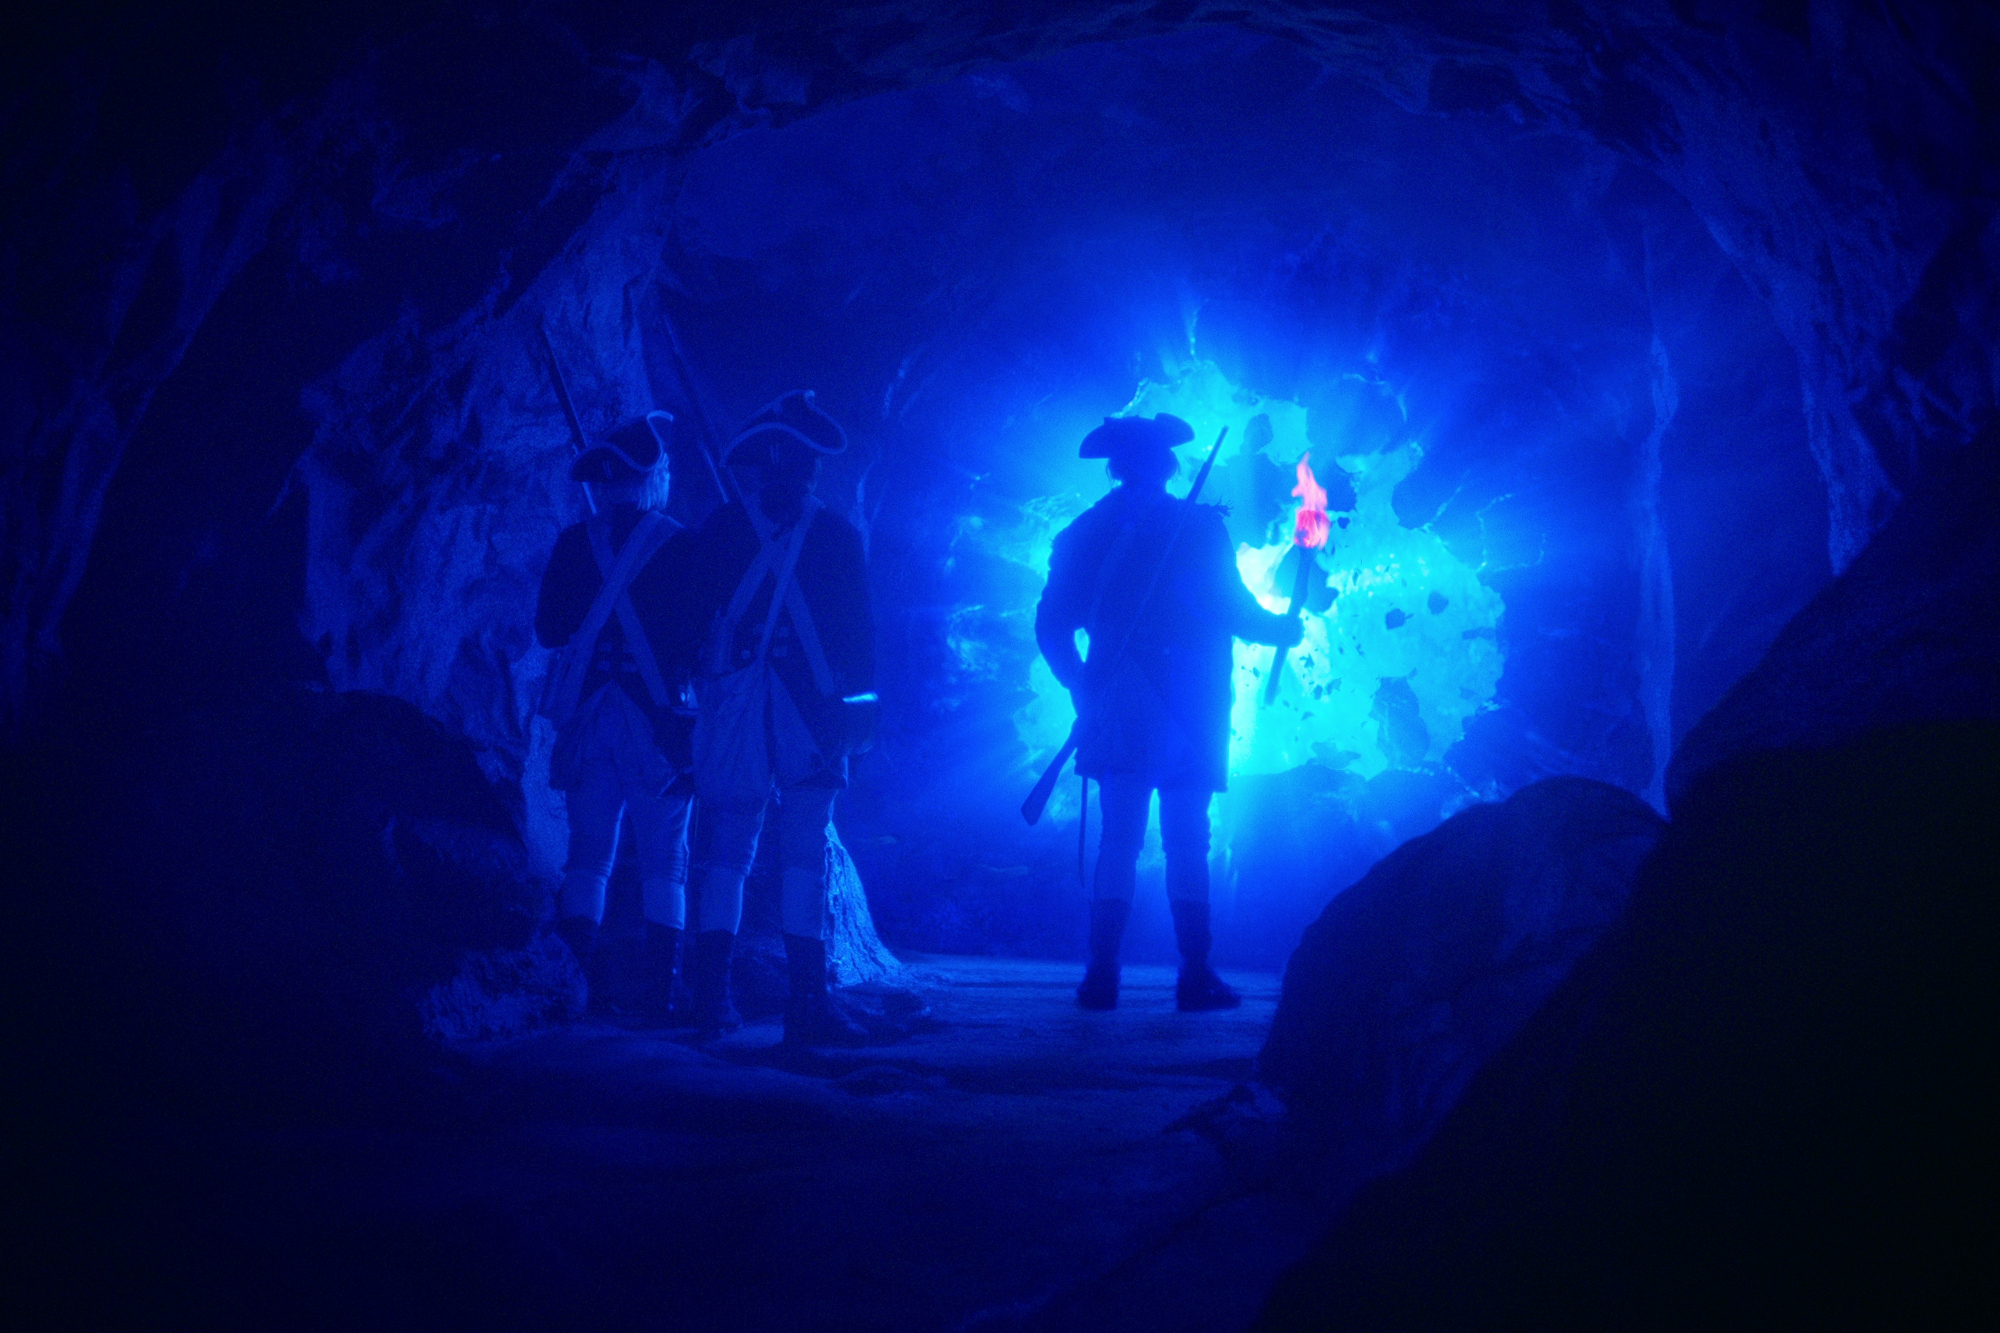 Ian Lake as Bolton, Jeff Lillico as Coffey, and Kevin Durand as Gideon in 'Locke & Key' Season 3 for our article about who dies. They're standing in a cave with blue light pouring out of the gateway to their world.